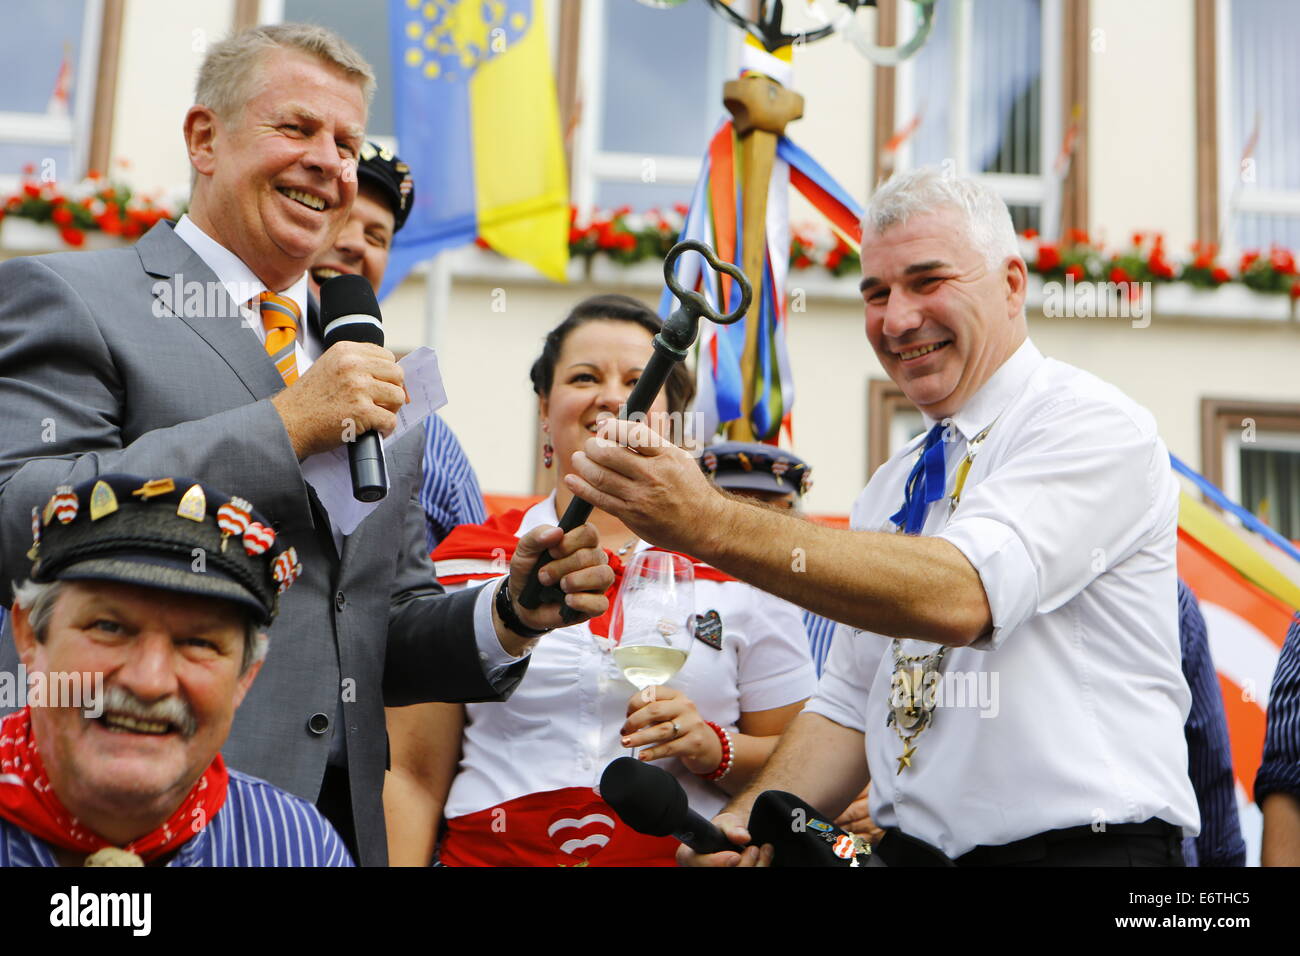 Germany. 30th Aug, 2014. The Lord Mayor of Worms, Michael Kissel (SPD), hands over the key to the city to the BojemŠŠschter vun de FischerwŠŠd (mayor of the fishermen's lea), Markus Trapp, who keeps it until the end of the festival. The largest wine fair along the Rhine, the Backfischfest, started in Worms with the traditional handing over of power from the Lord Mayor to the mayor of the fishermenÕs lea. The ceremony included dances and music. Credit:  Michael Debets/Pacific Press/Alamy Live News Stock Photo